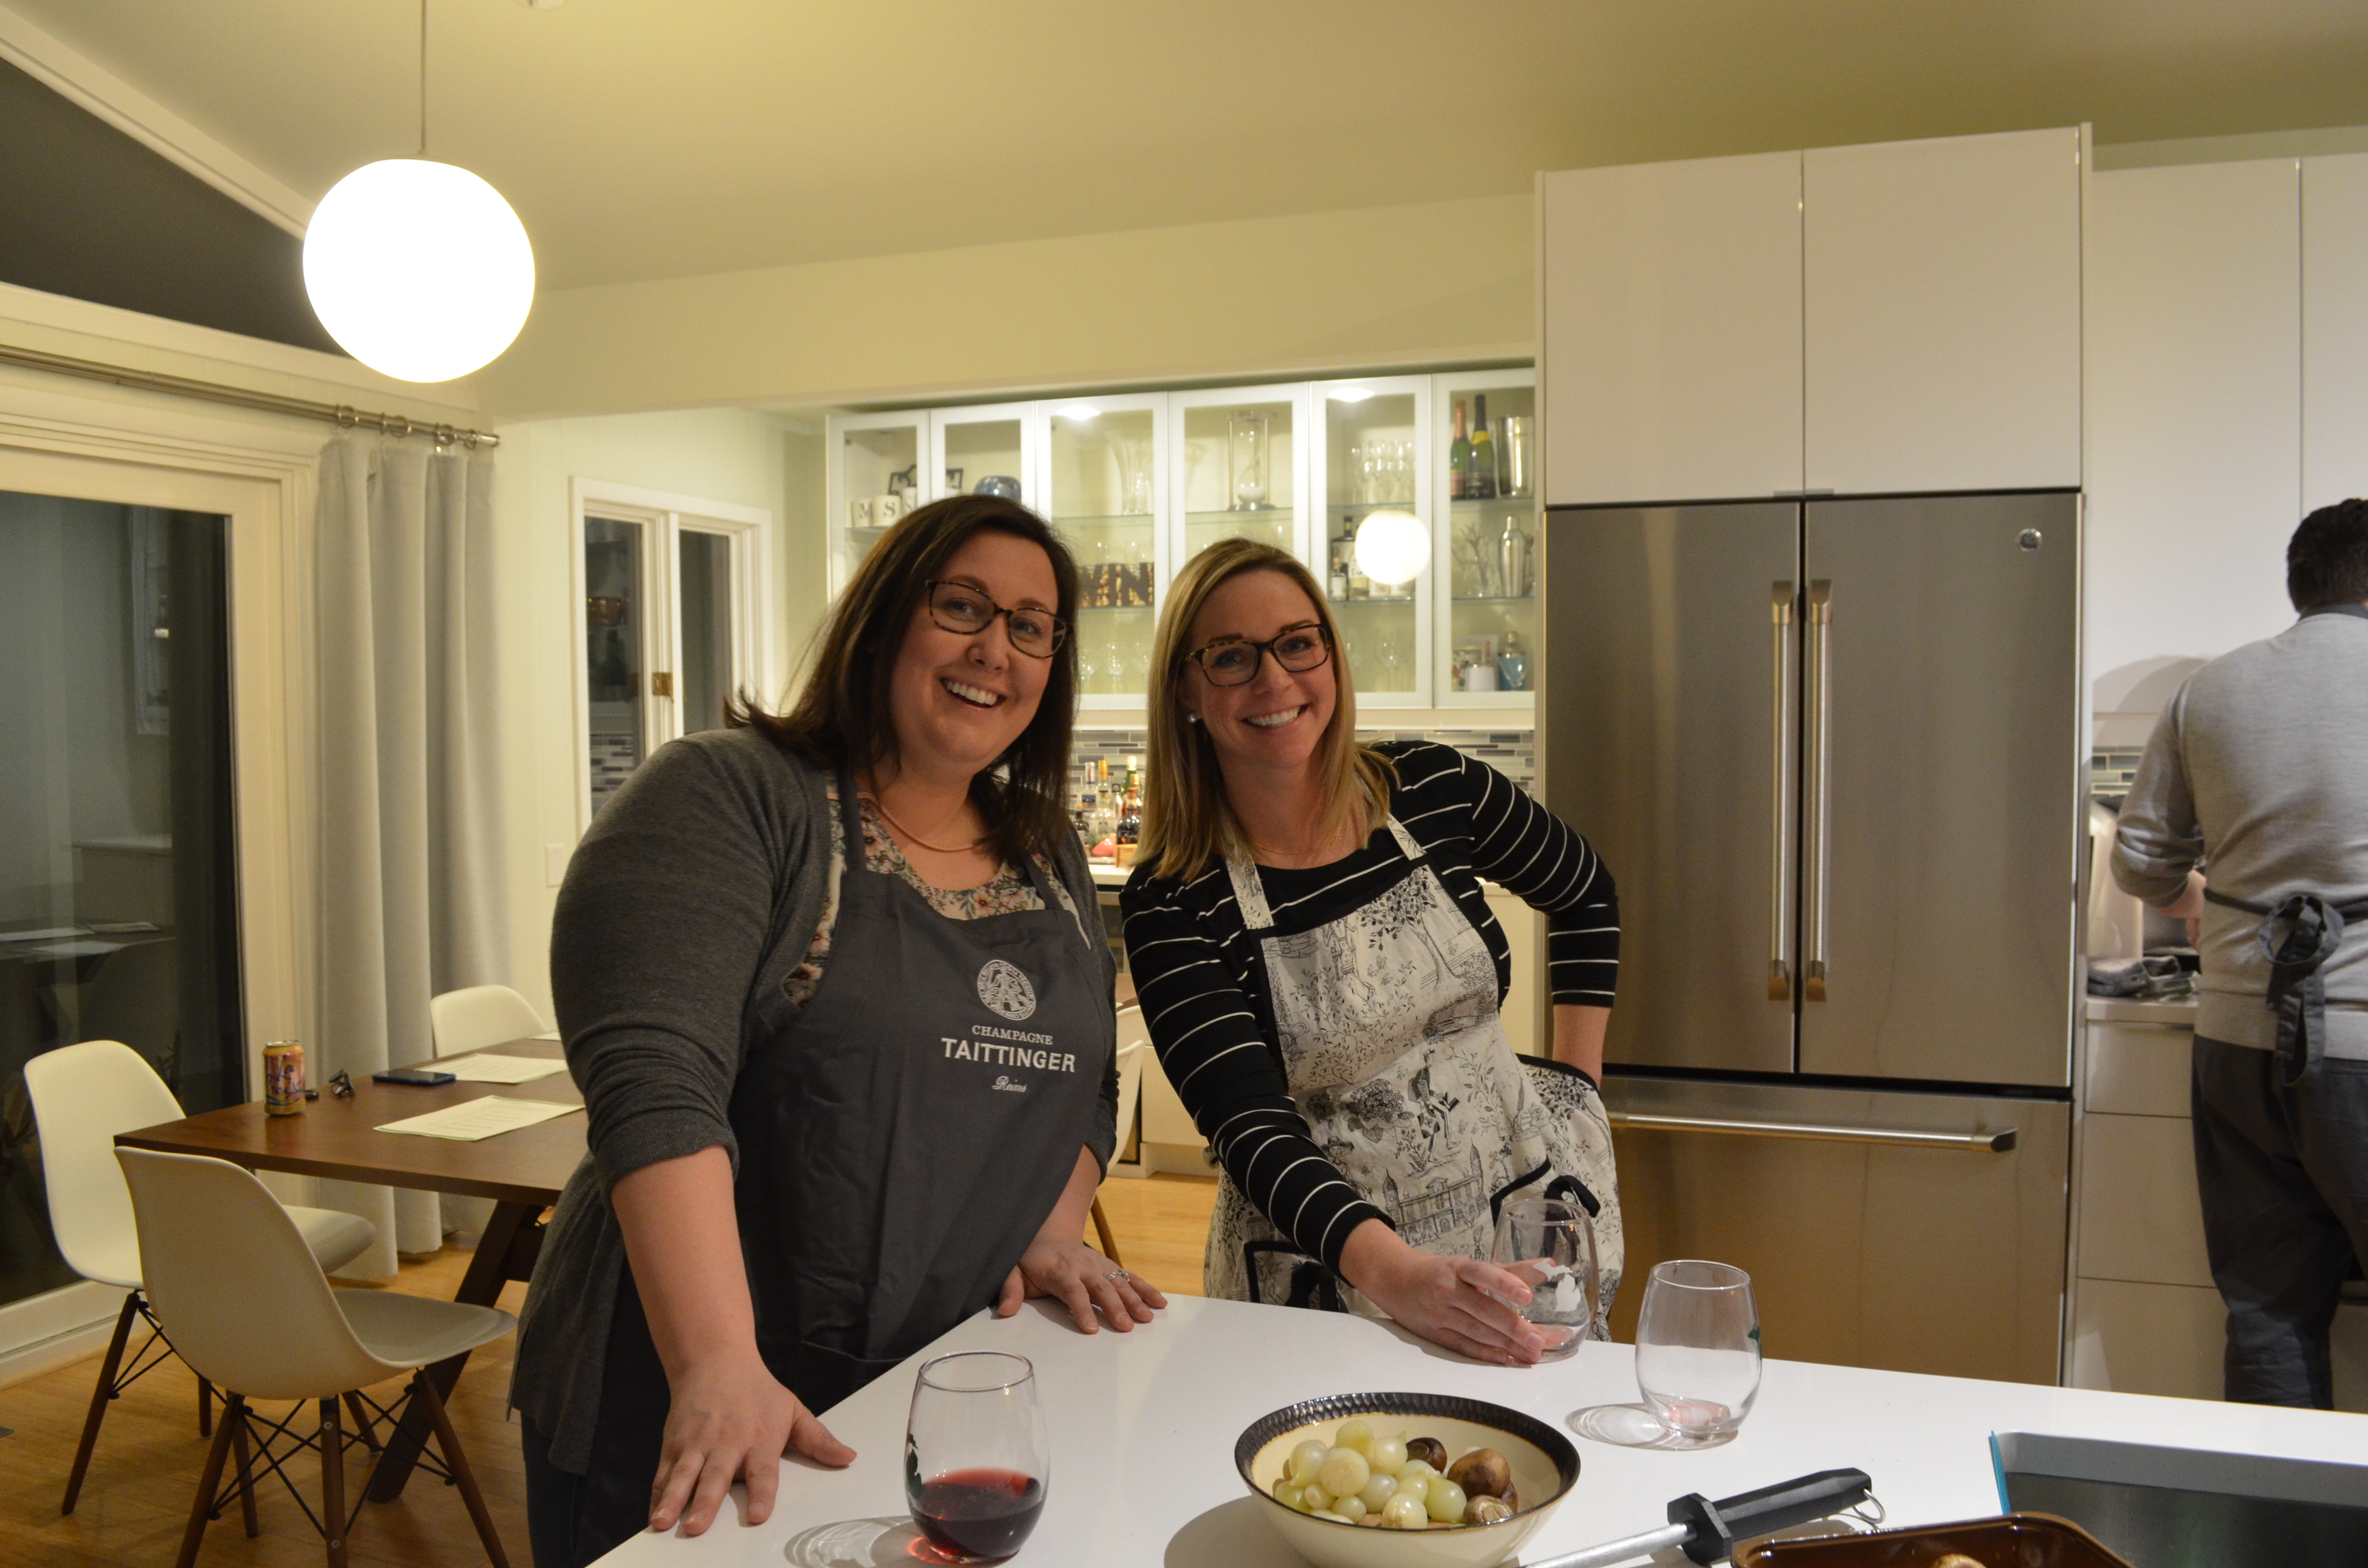 An evening of cooking with the GreenSquare team!